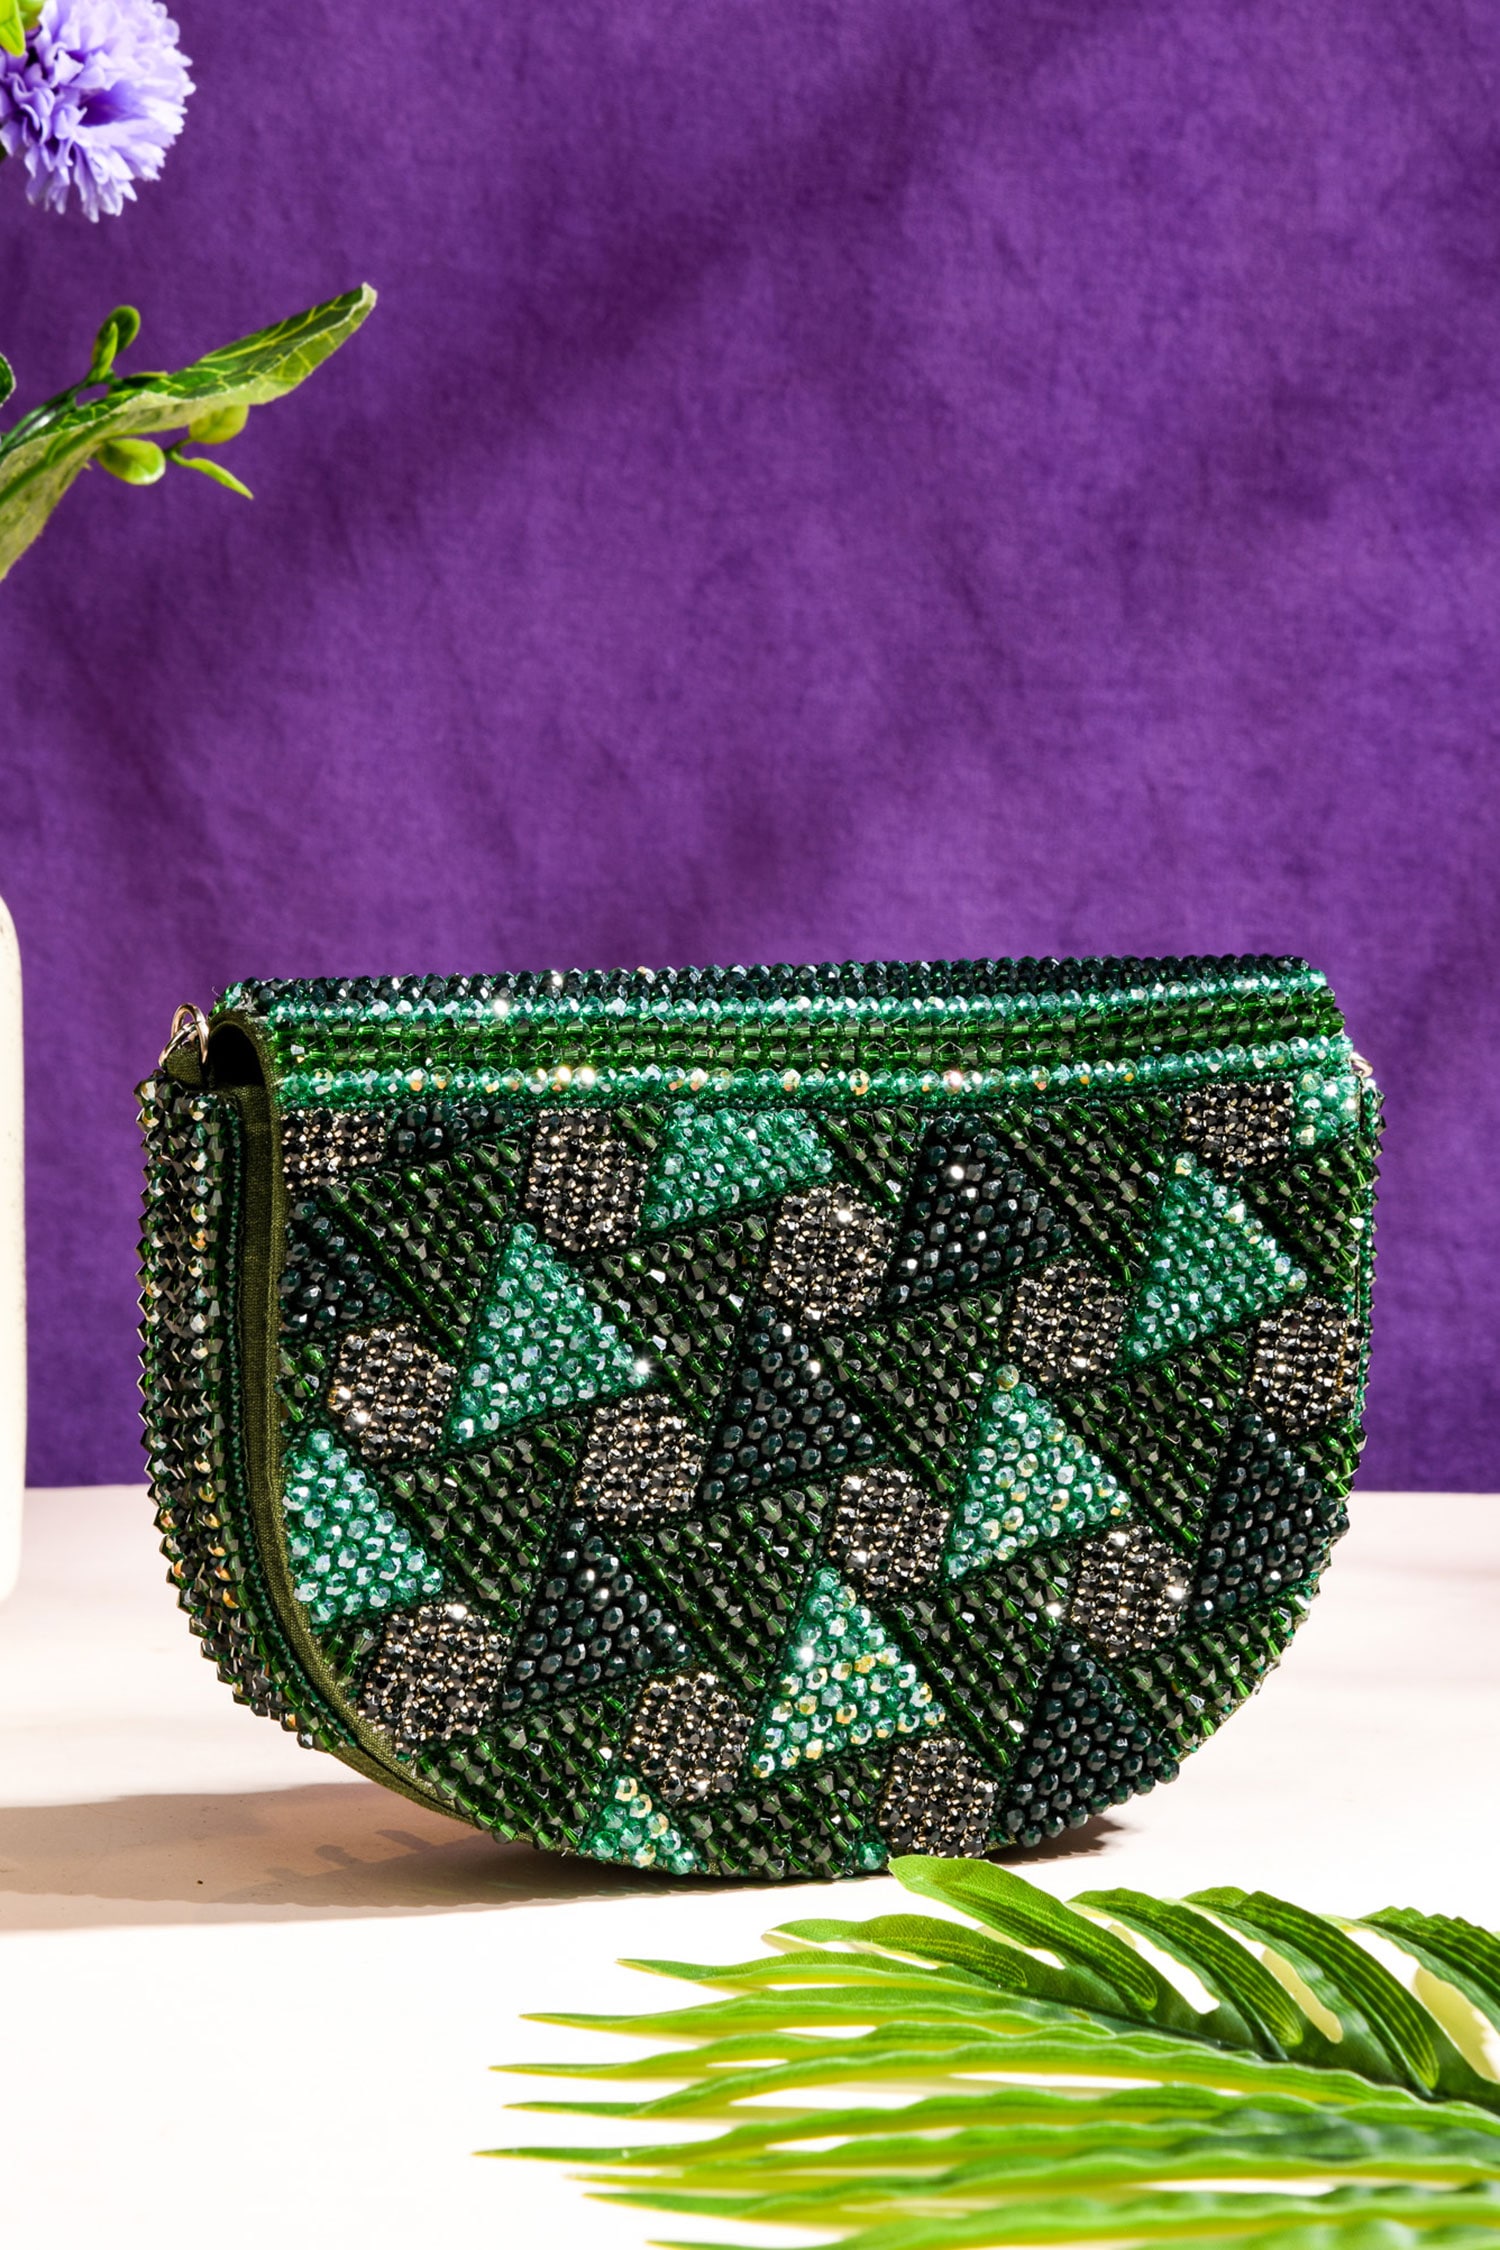 The Purple Sack - Green Crystal Beads Embroidered Beauty Bag